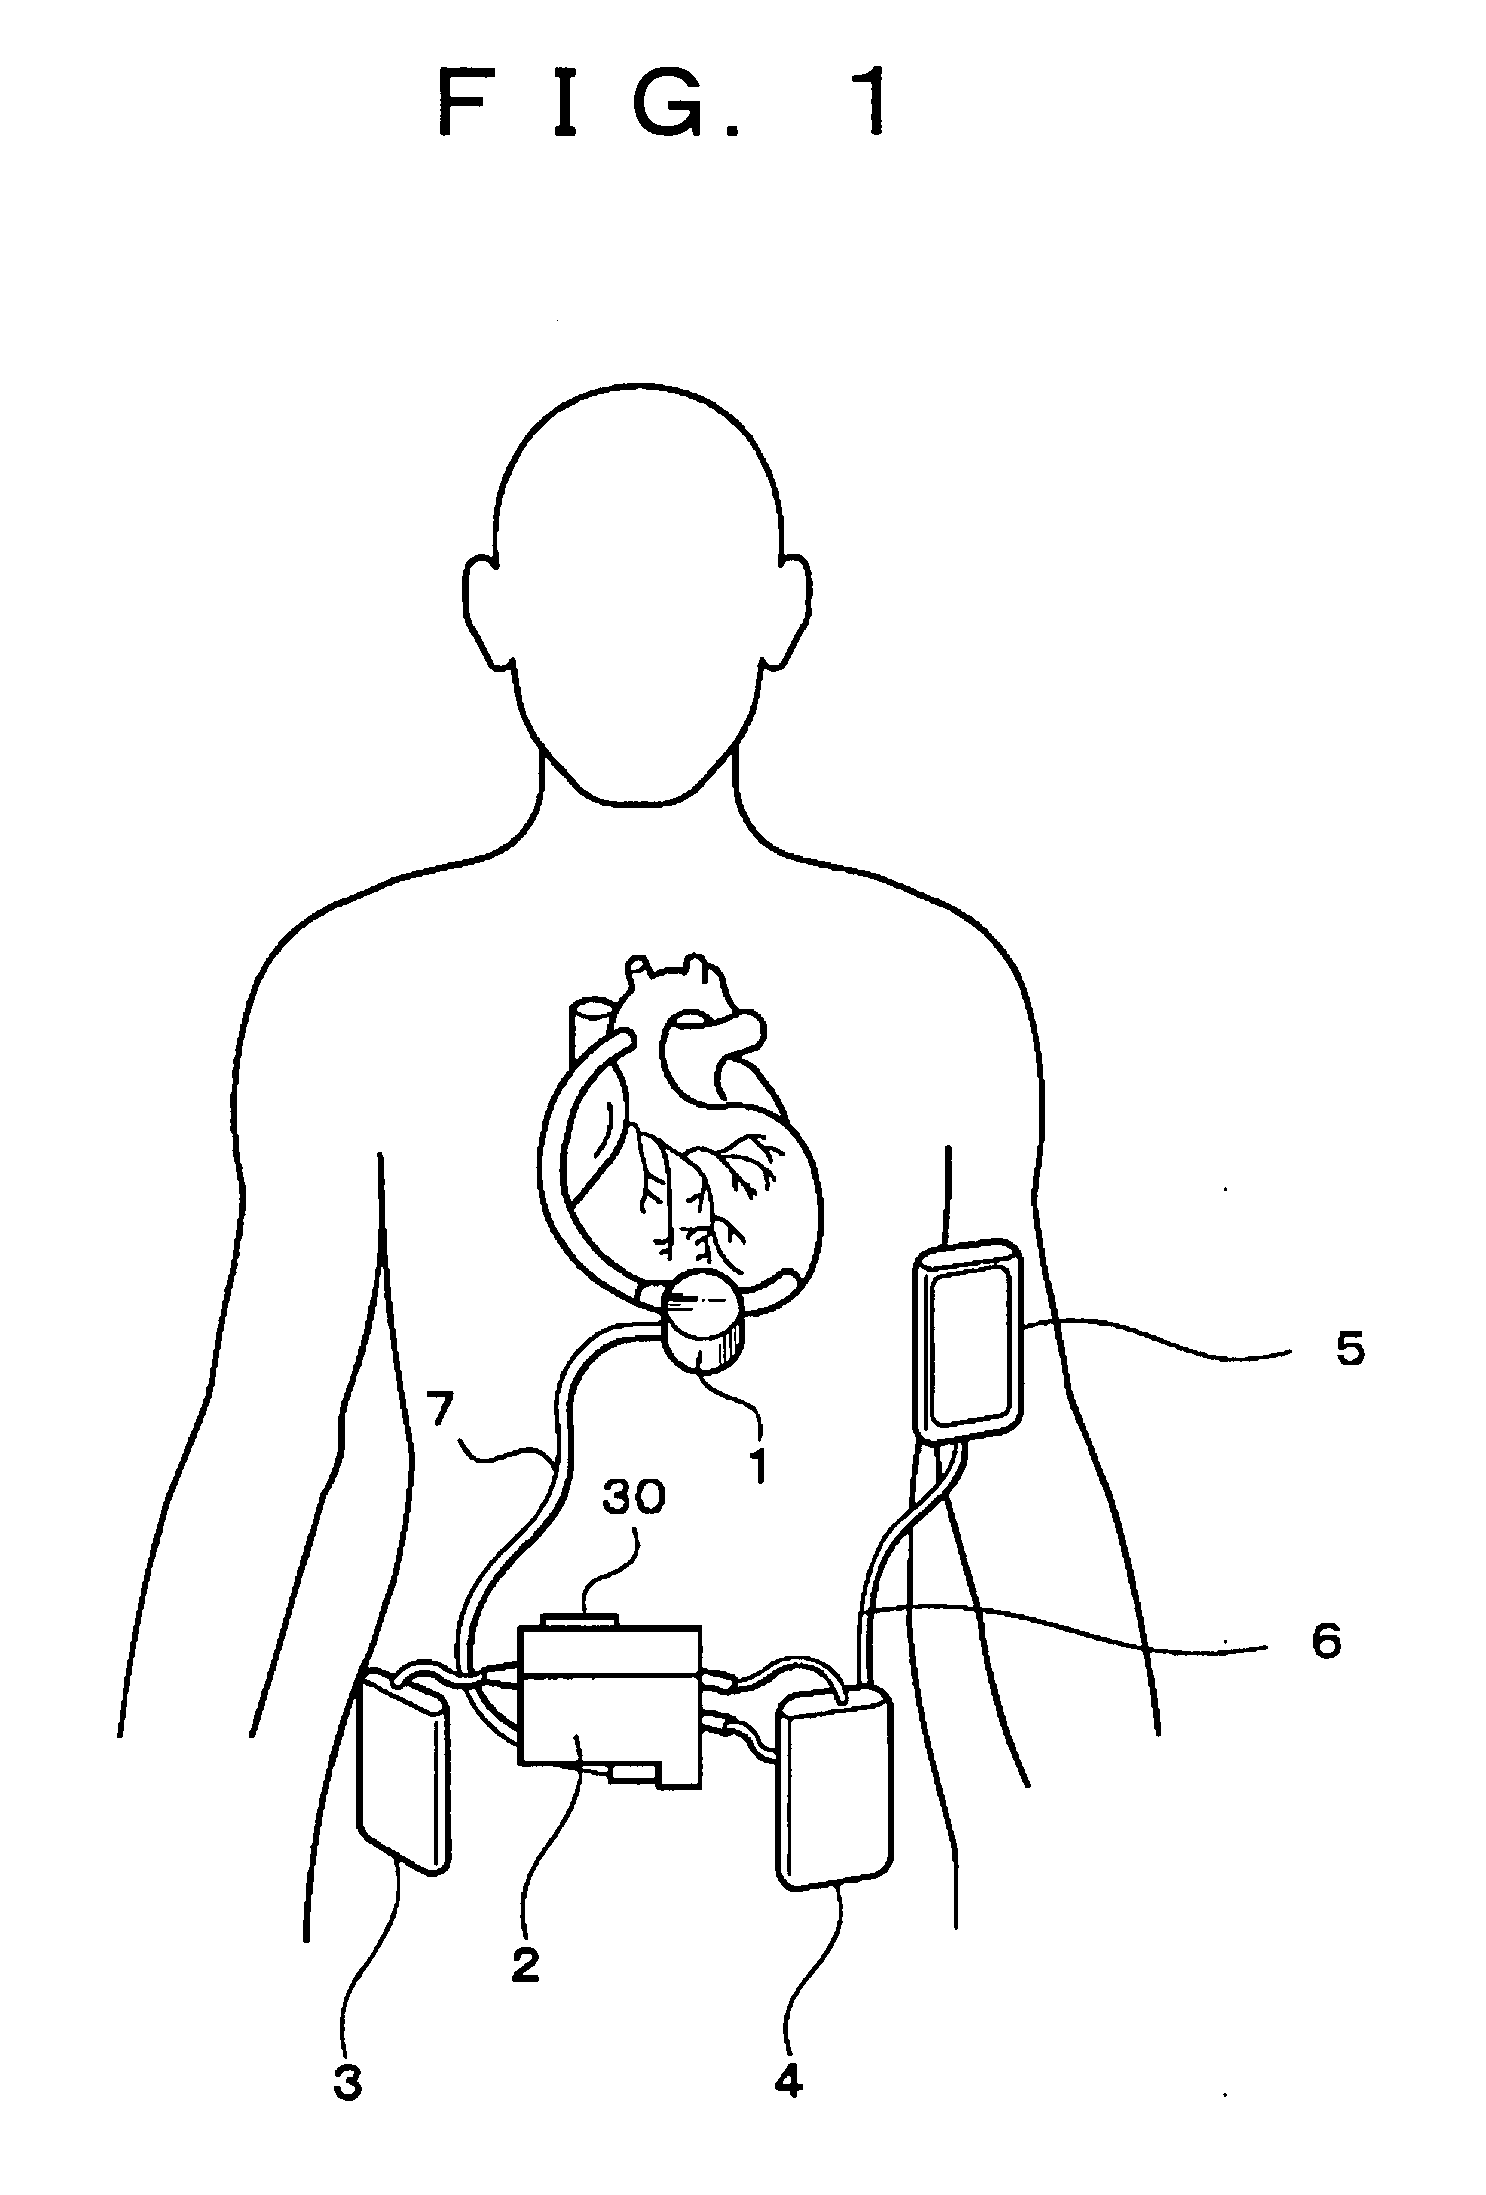 Blood pump system for artificial heart and apparatus supervisory system